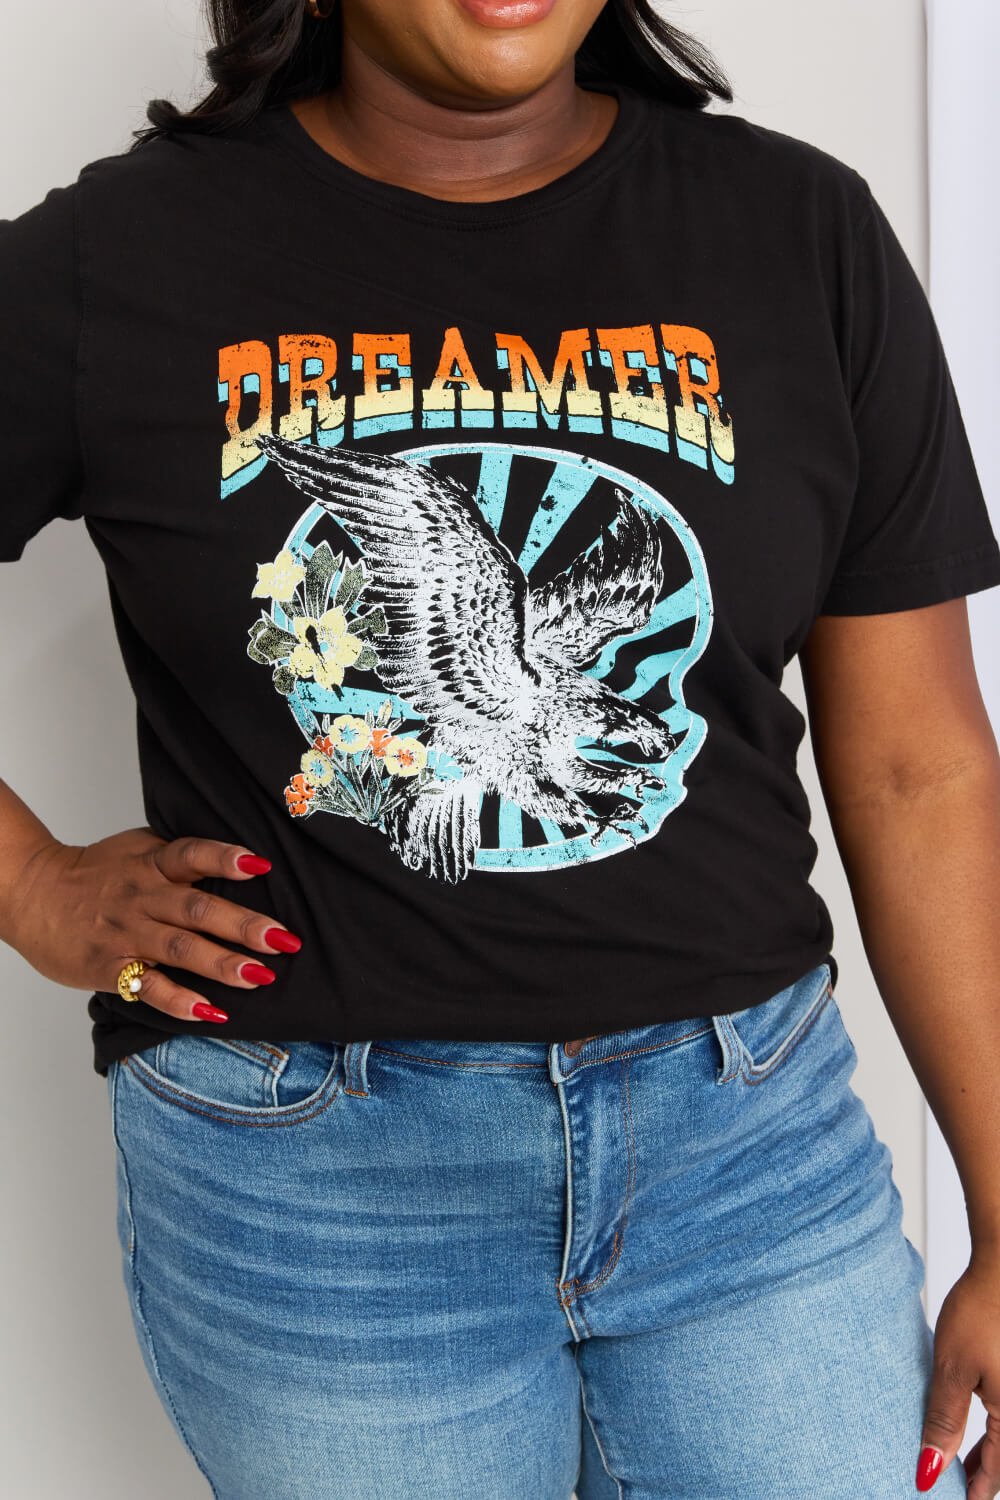 The Alora: 'Dreamer' Graphic T-Shirt by mineB